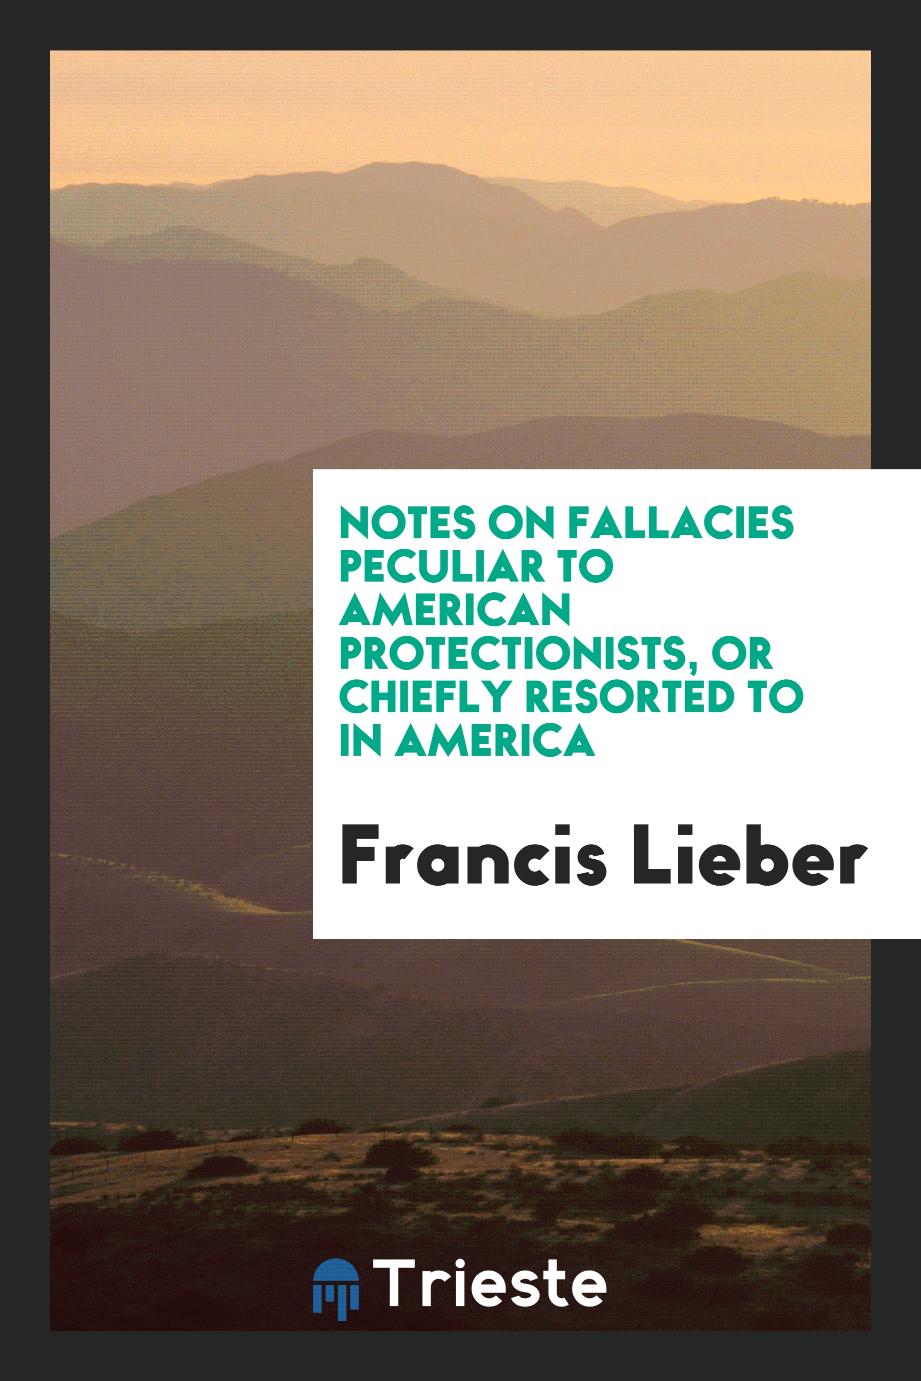 Notes on fallacies peculiar to American protectionists, or chiefly resorted to in America